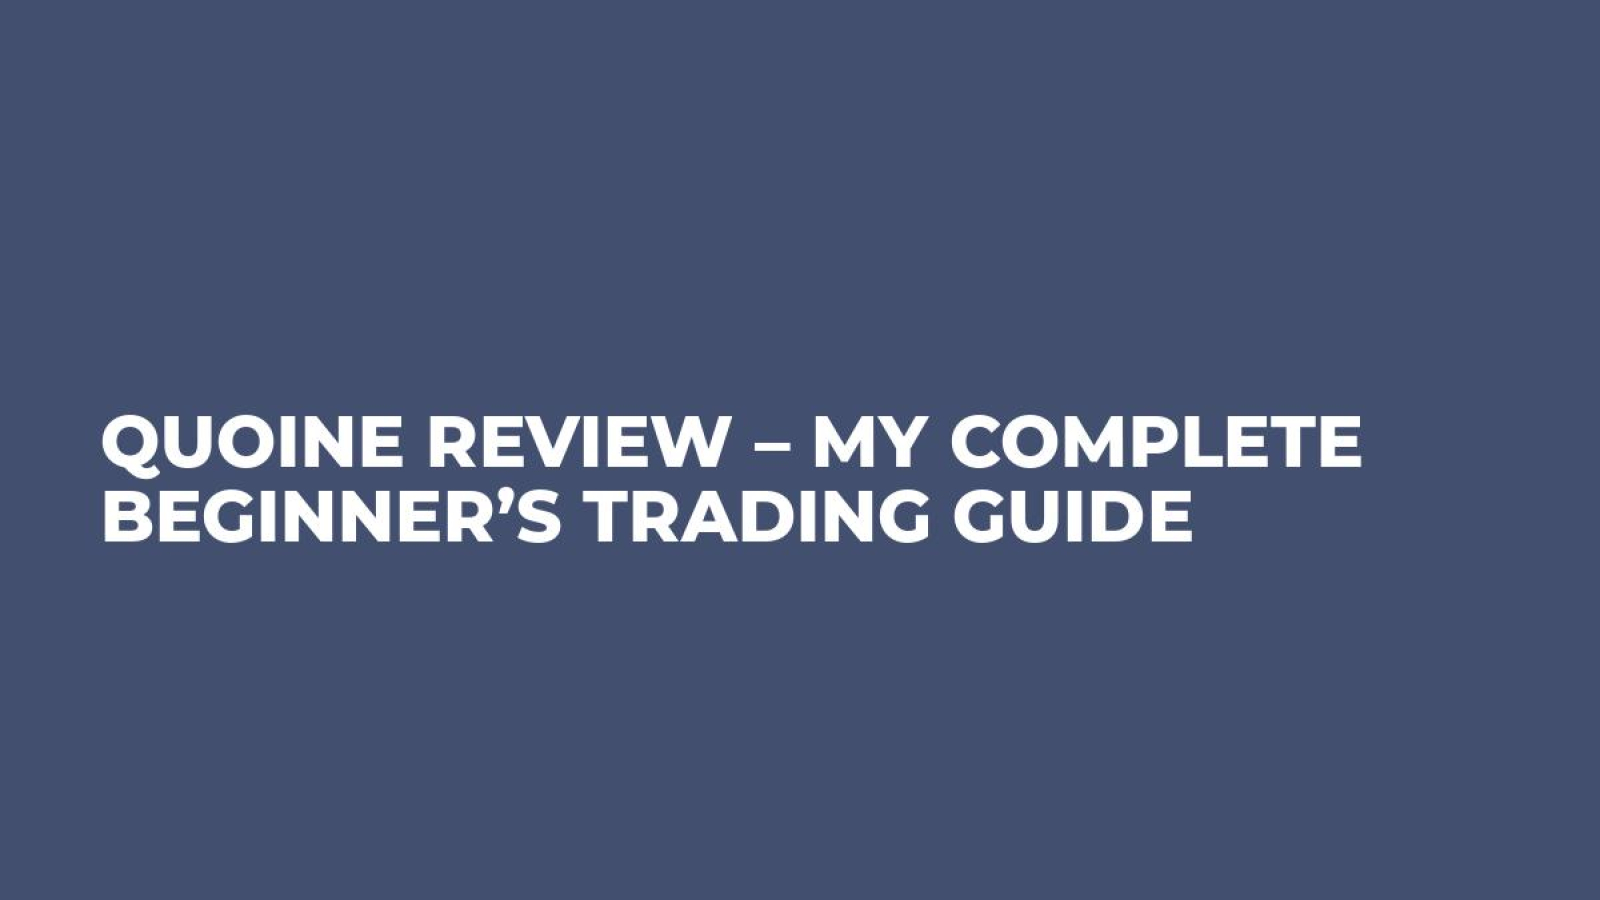 Quoine Review – My Complete Beginner’s Trading Guide